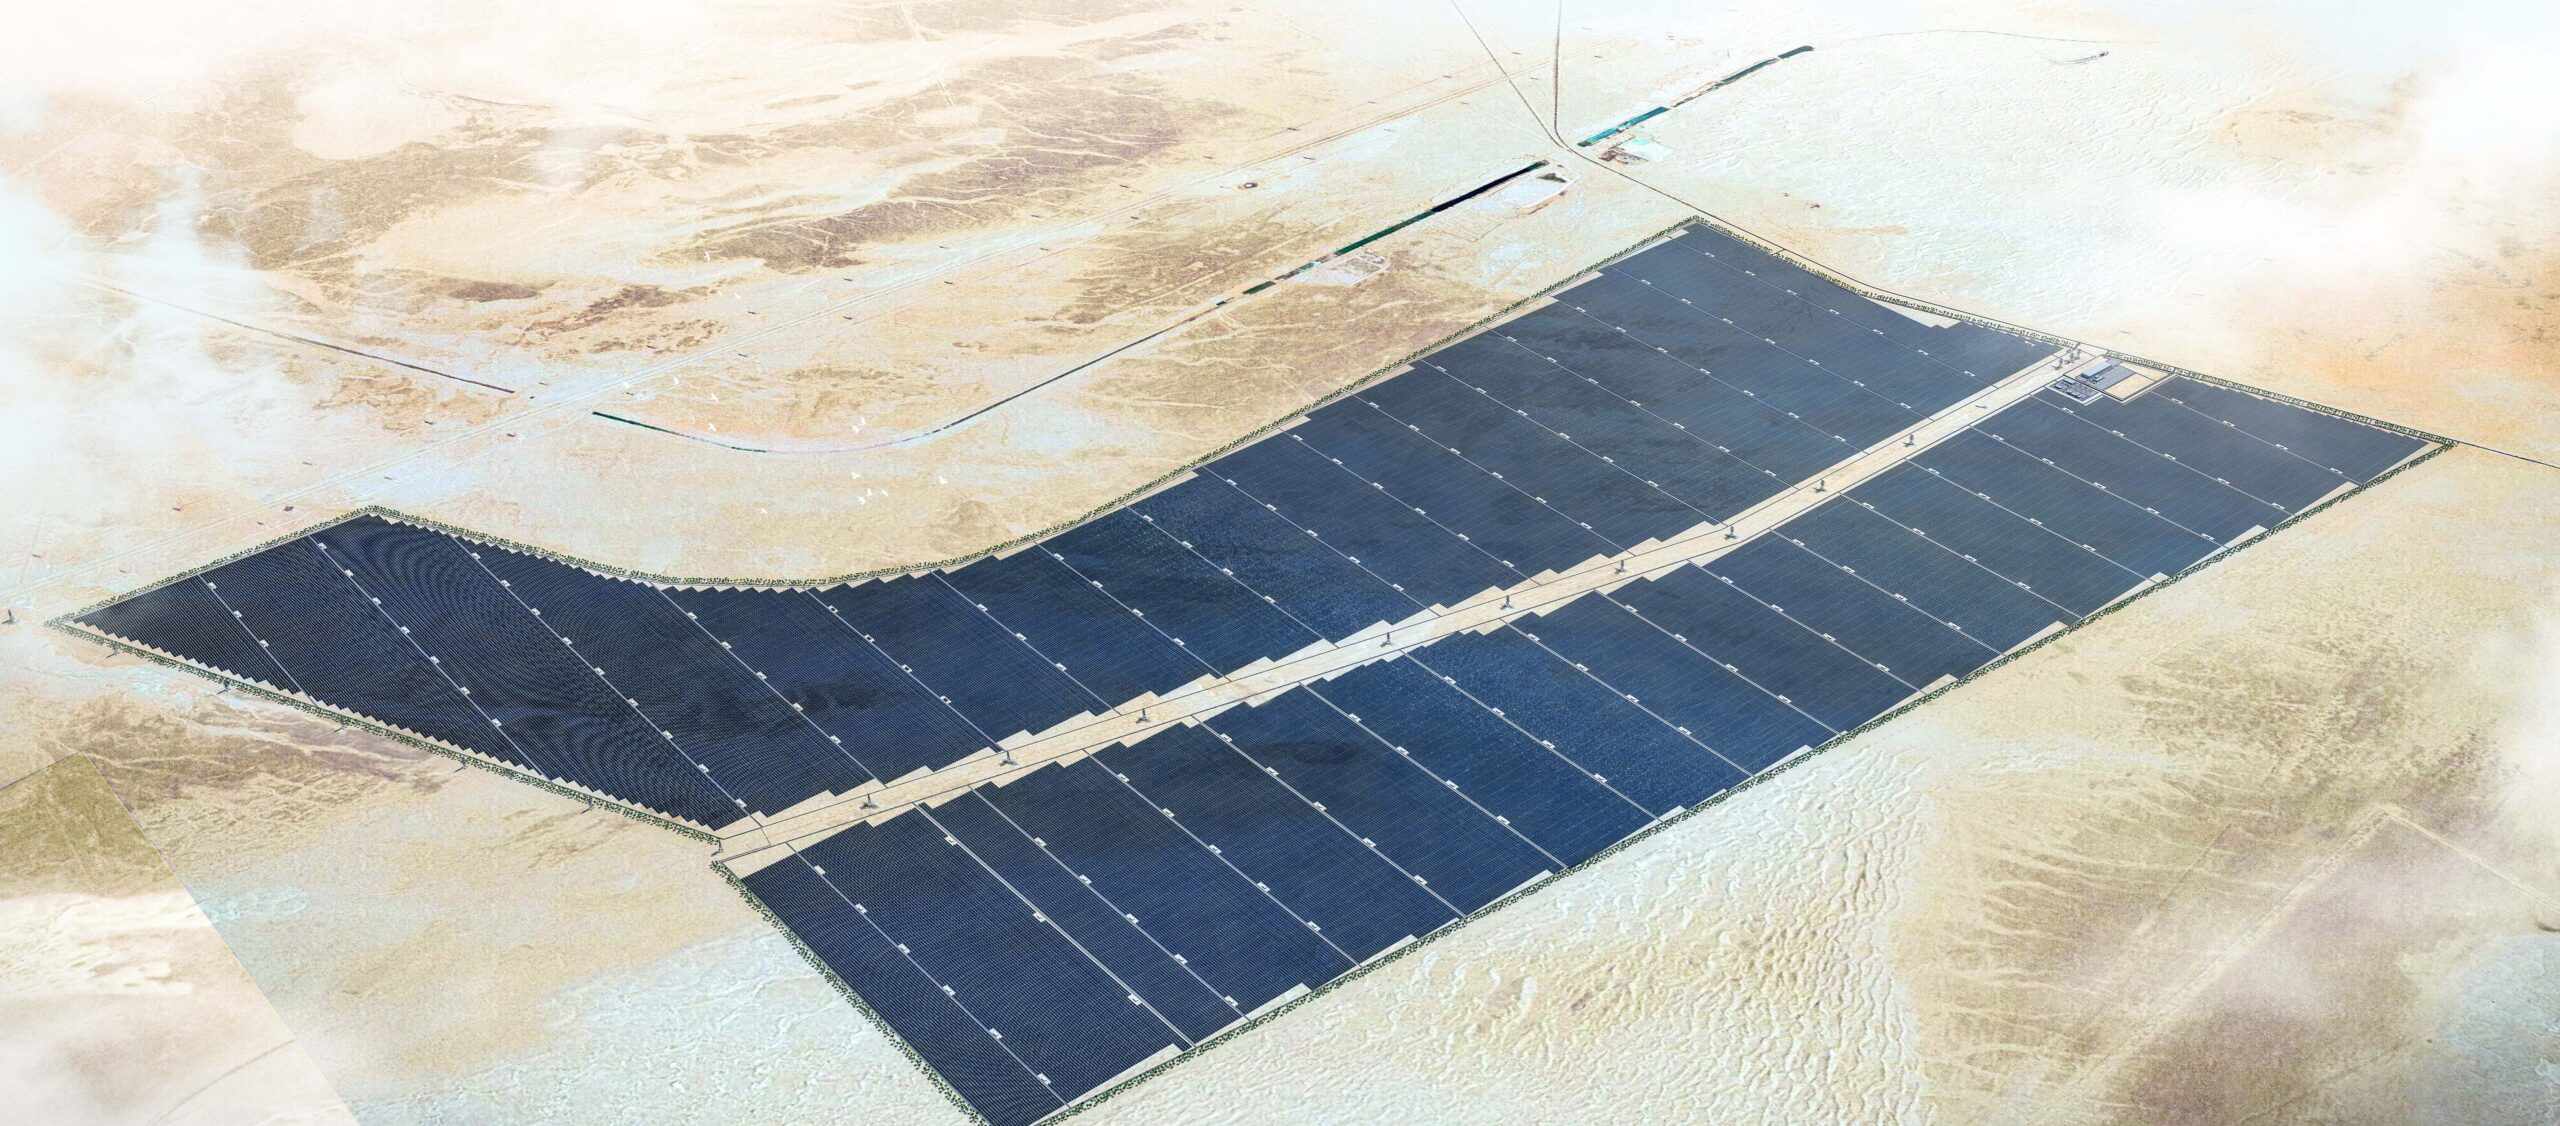 uae,project,power,generation,photovoltaic